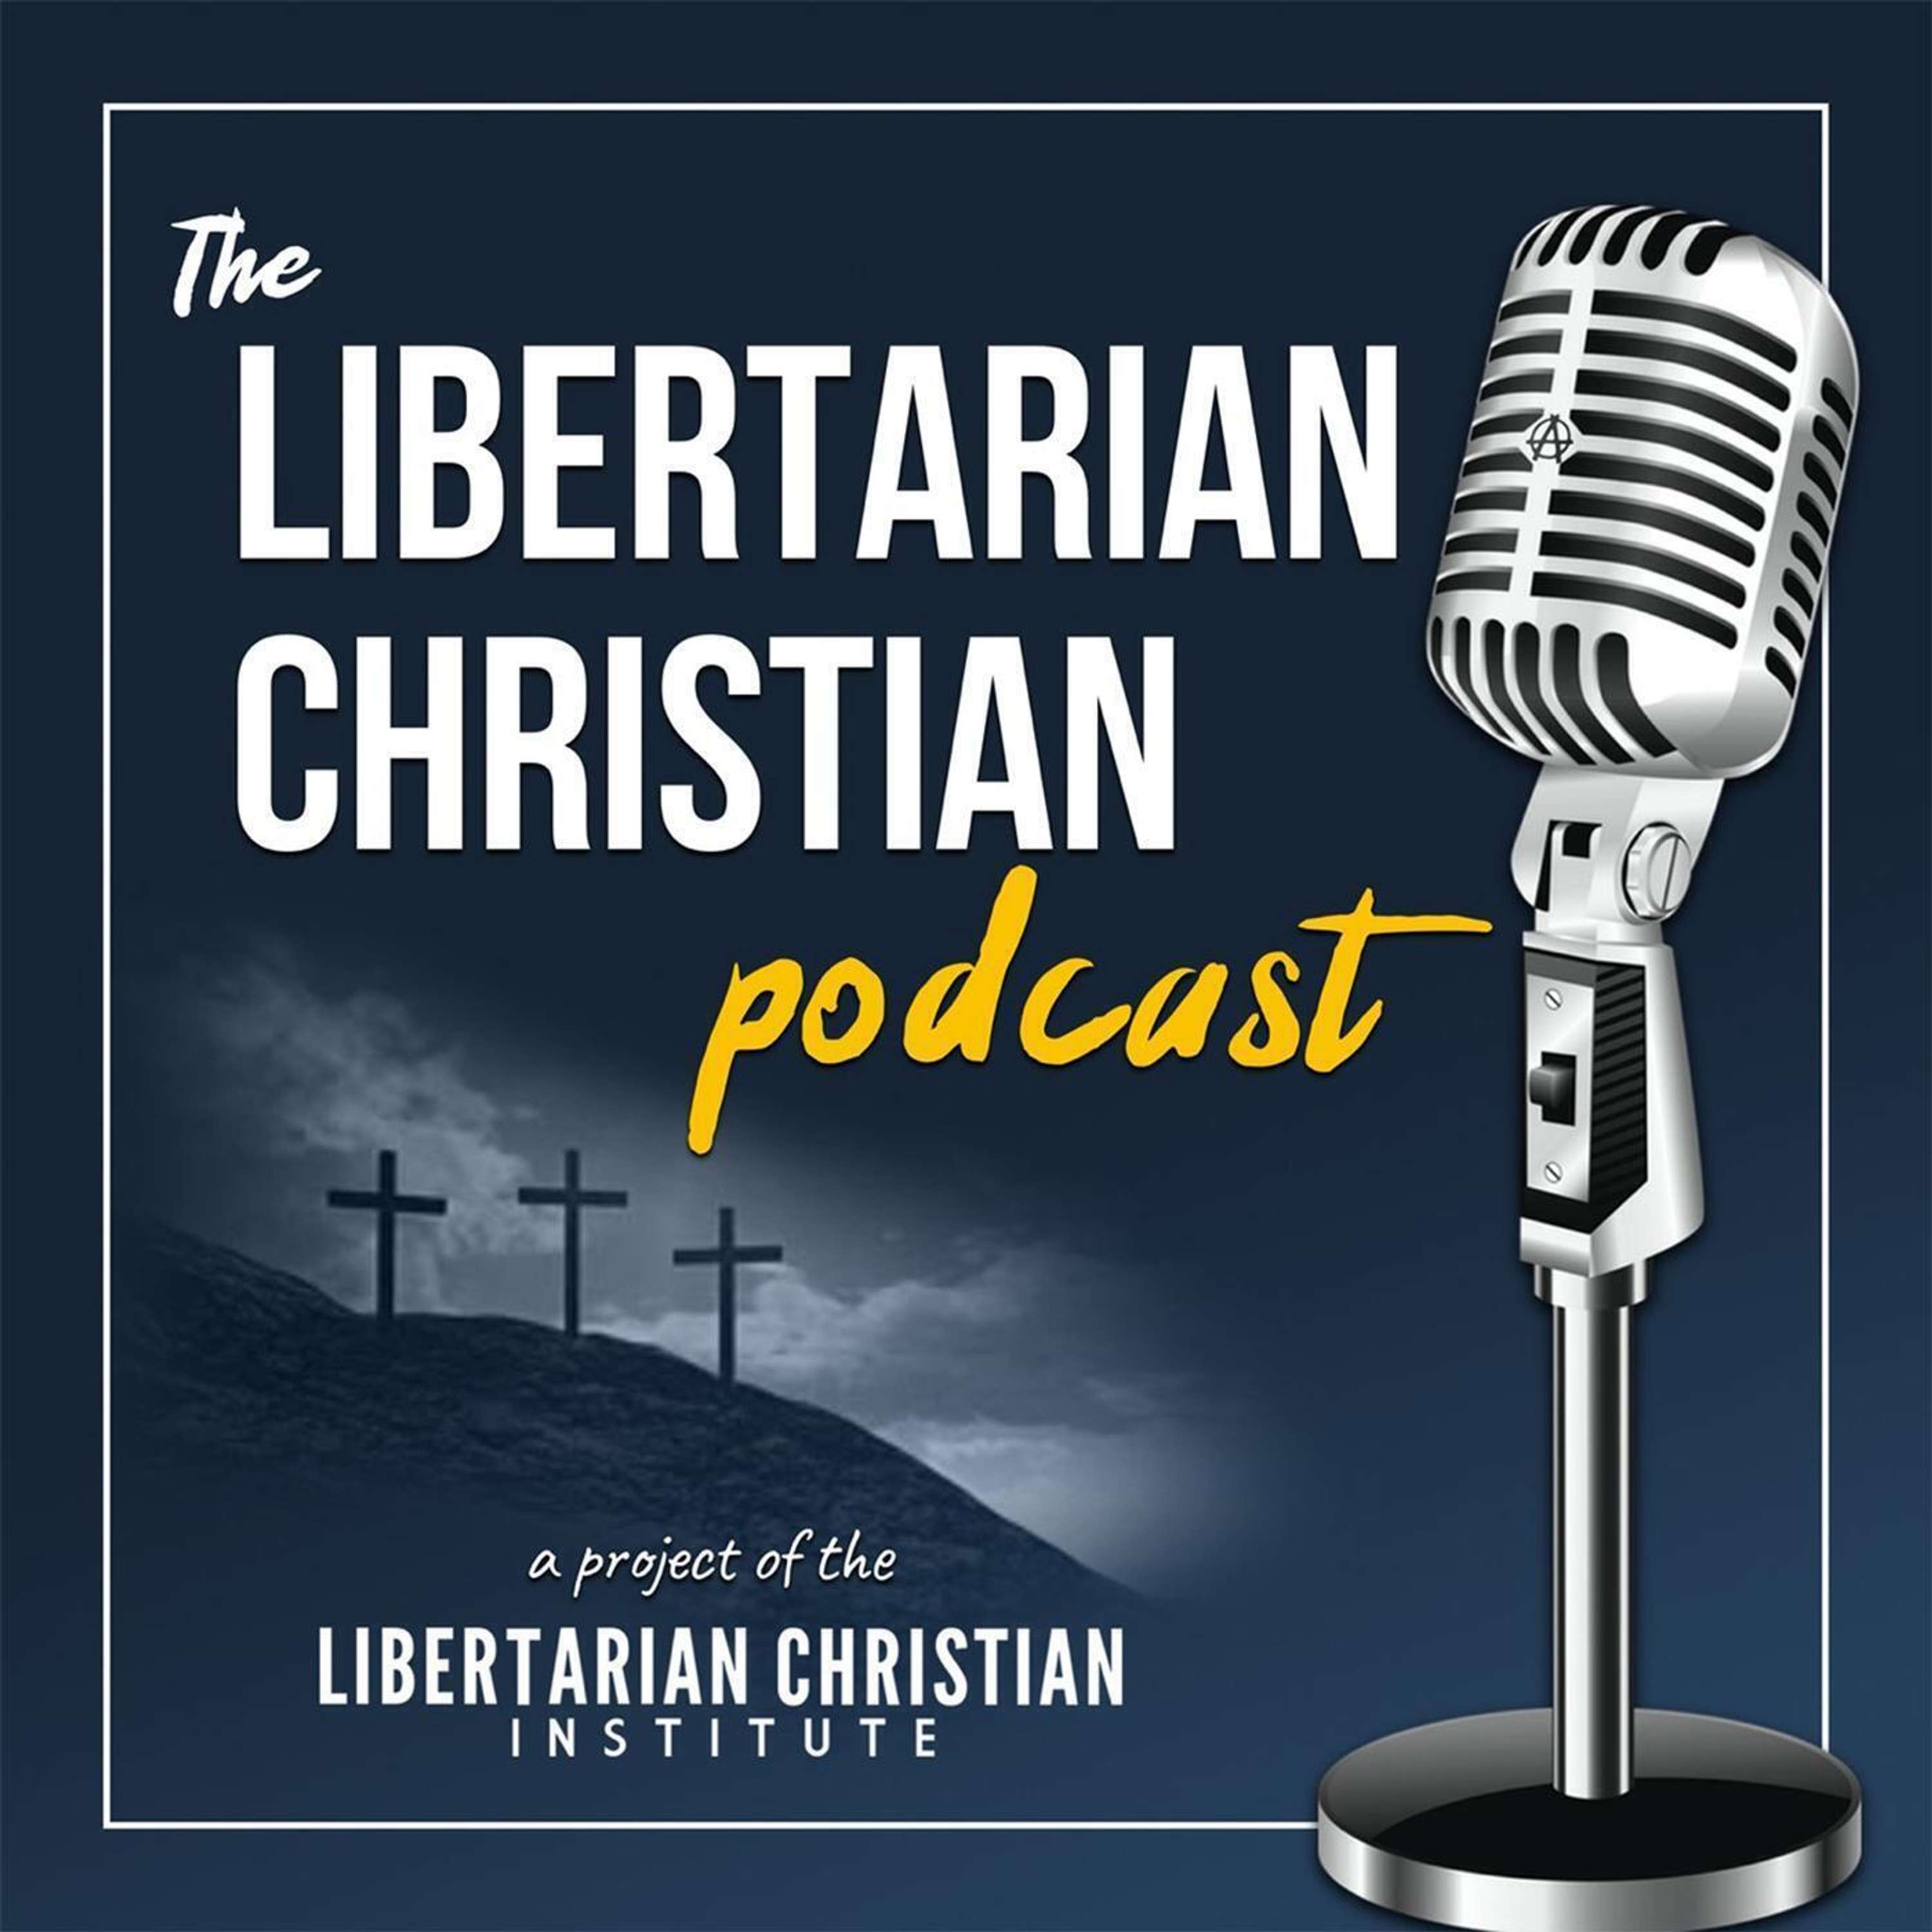 Ep 277: How to Promote Liberty to Your Christian Friends